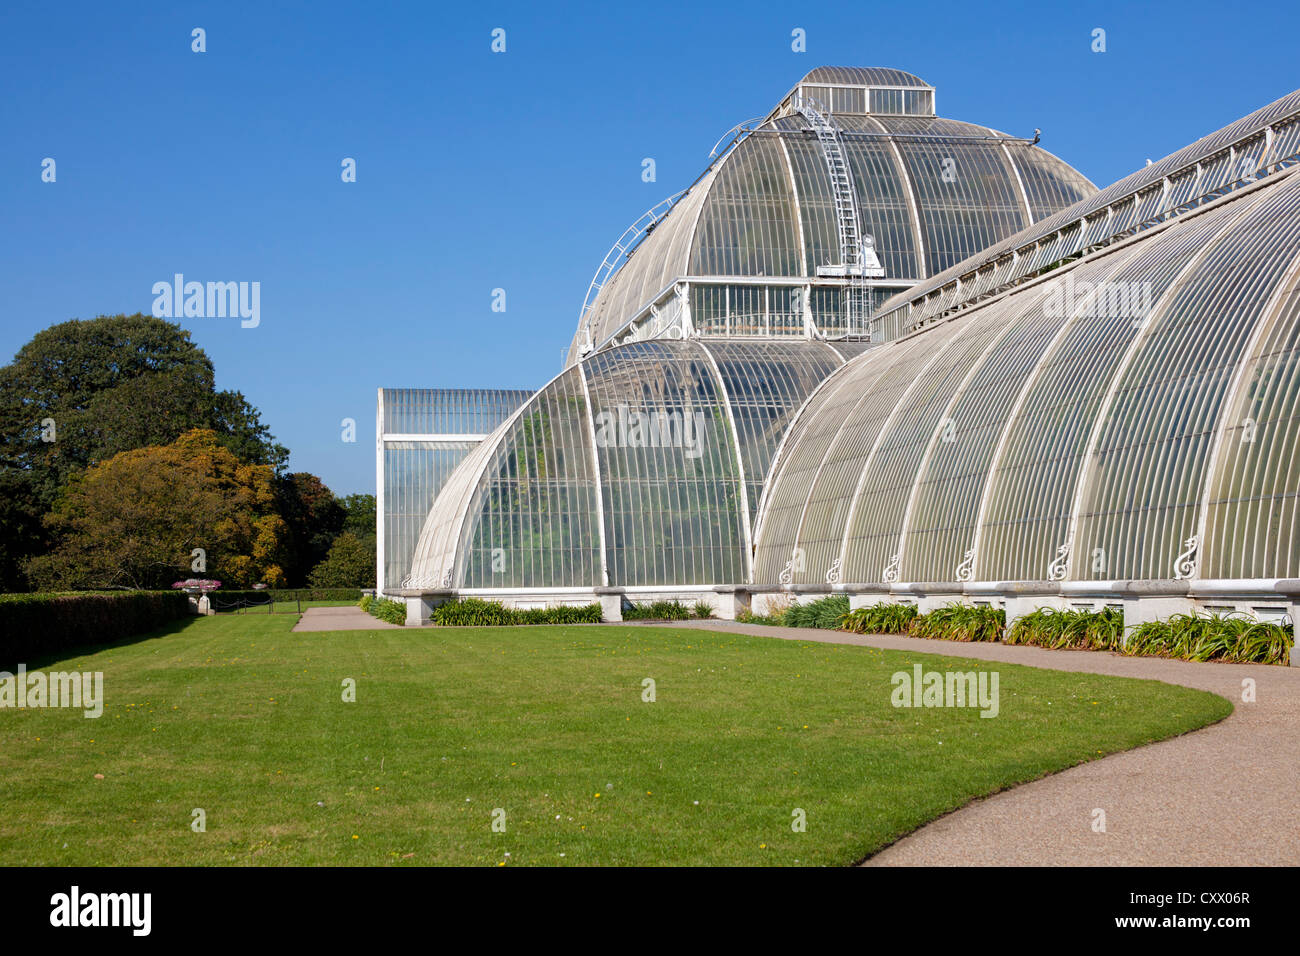 The famous Palm House at Kew Gardens, London, UK Stock Photo